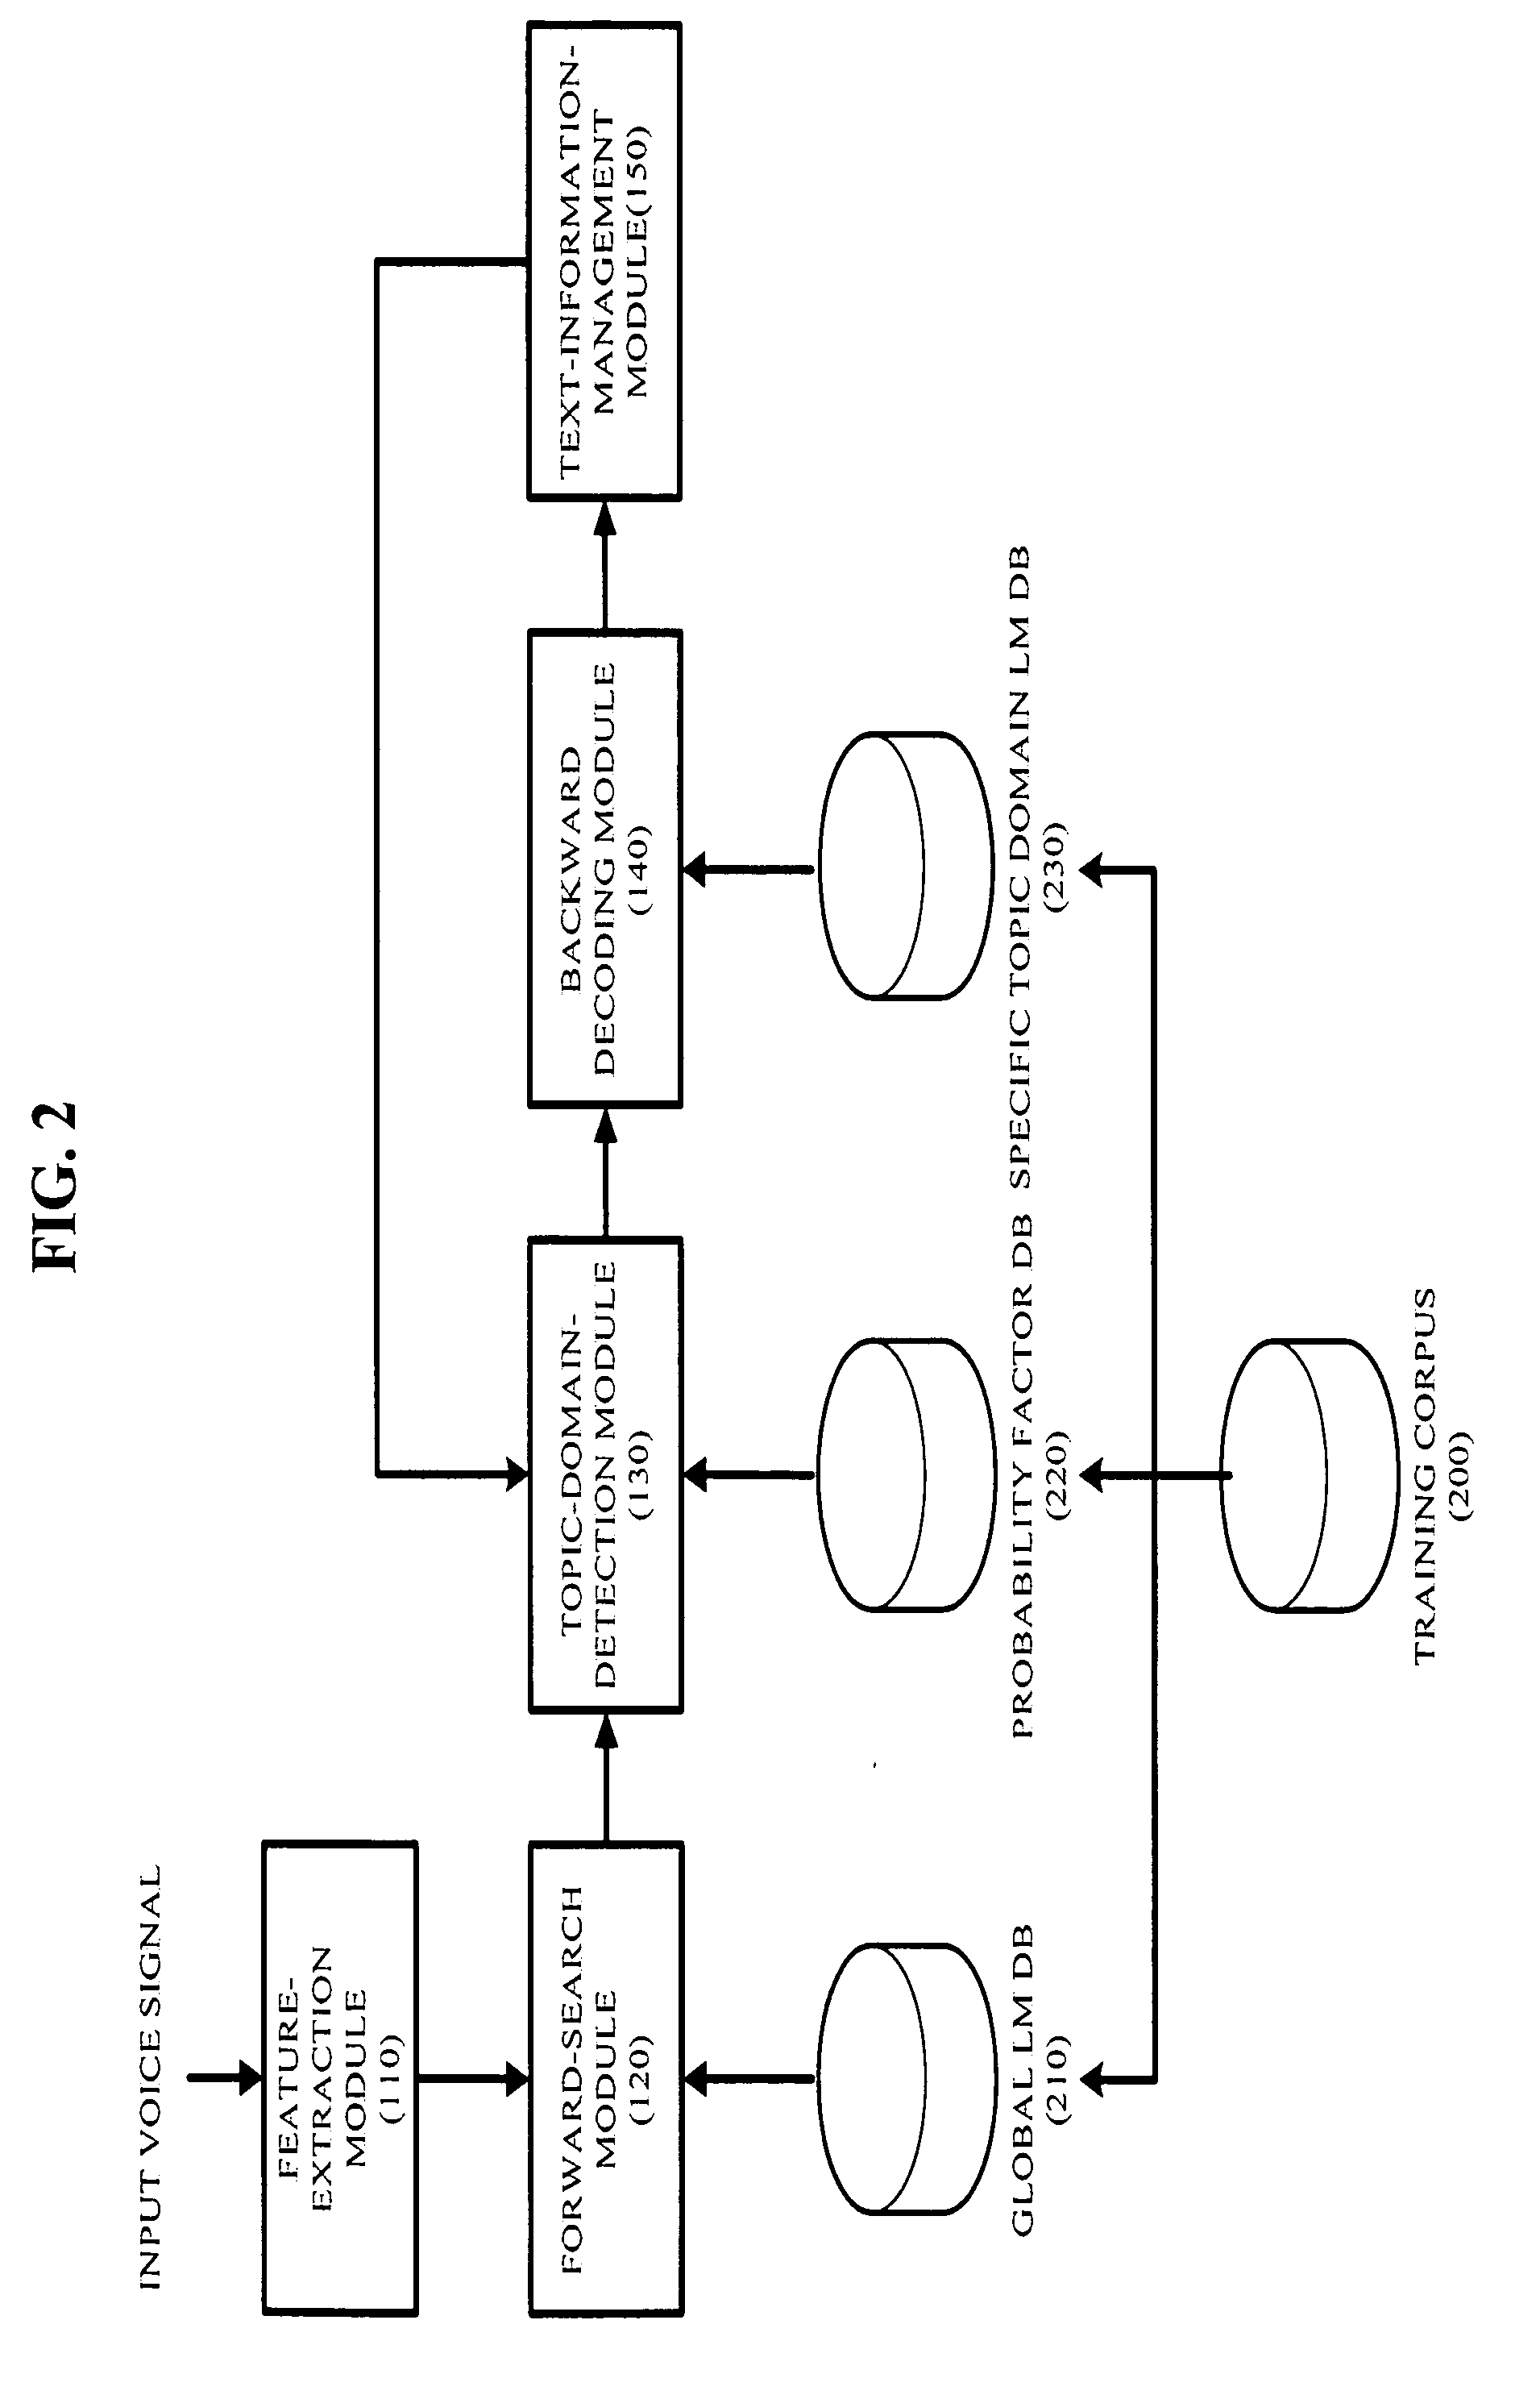 Apparatus, method, and medium for dialogue speech recognition using topic domain detection